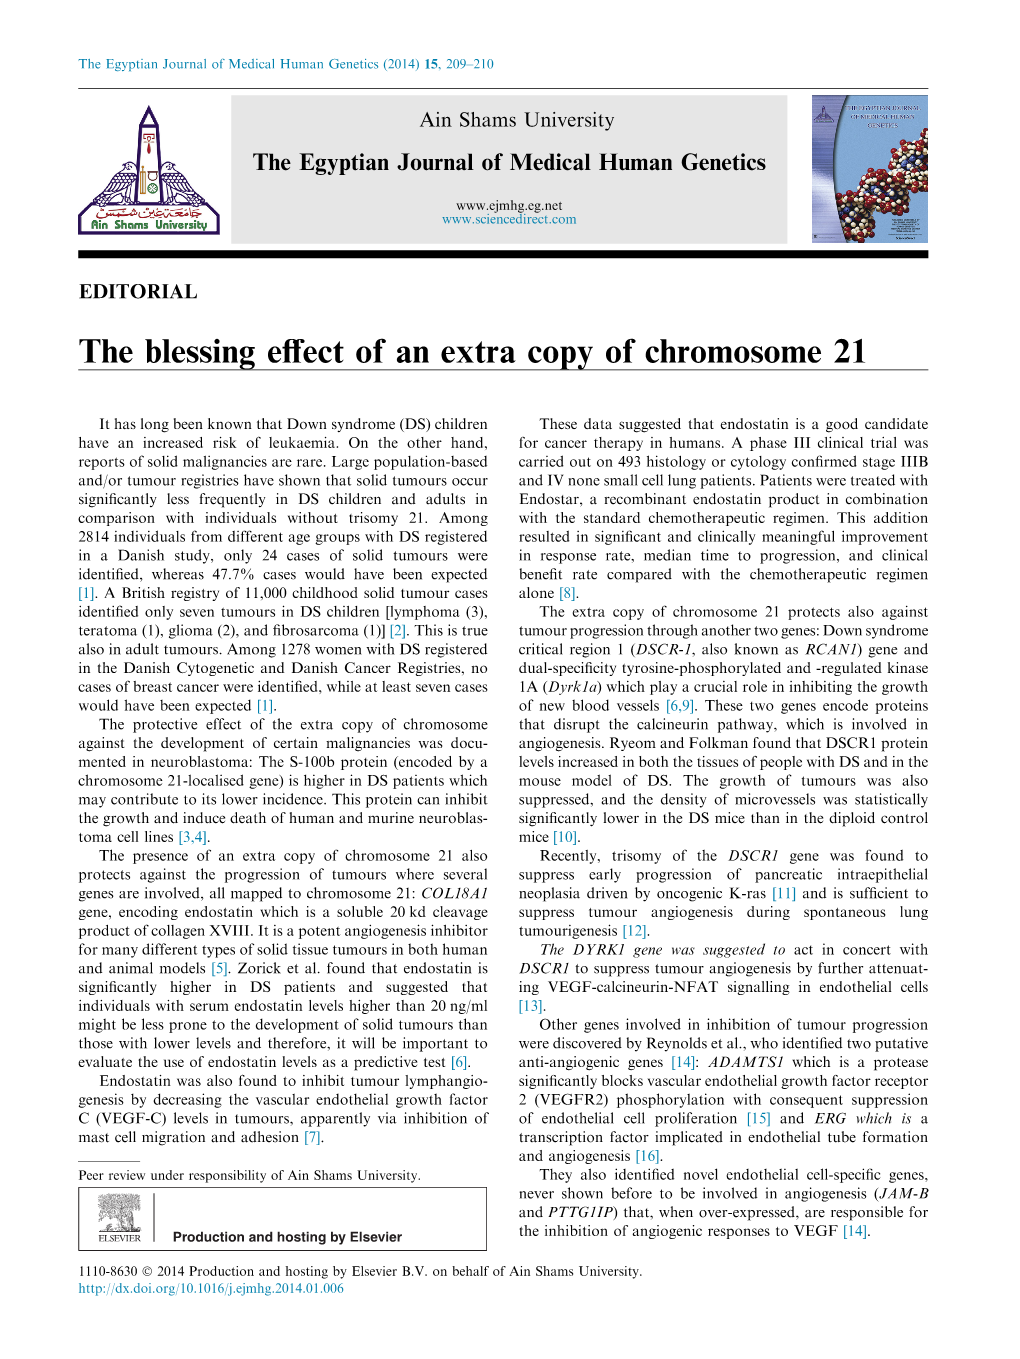 The Blessing Effect of an Extra Copy of Chromosome 21